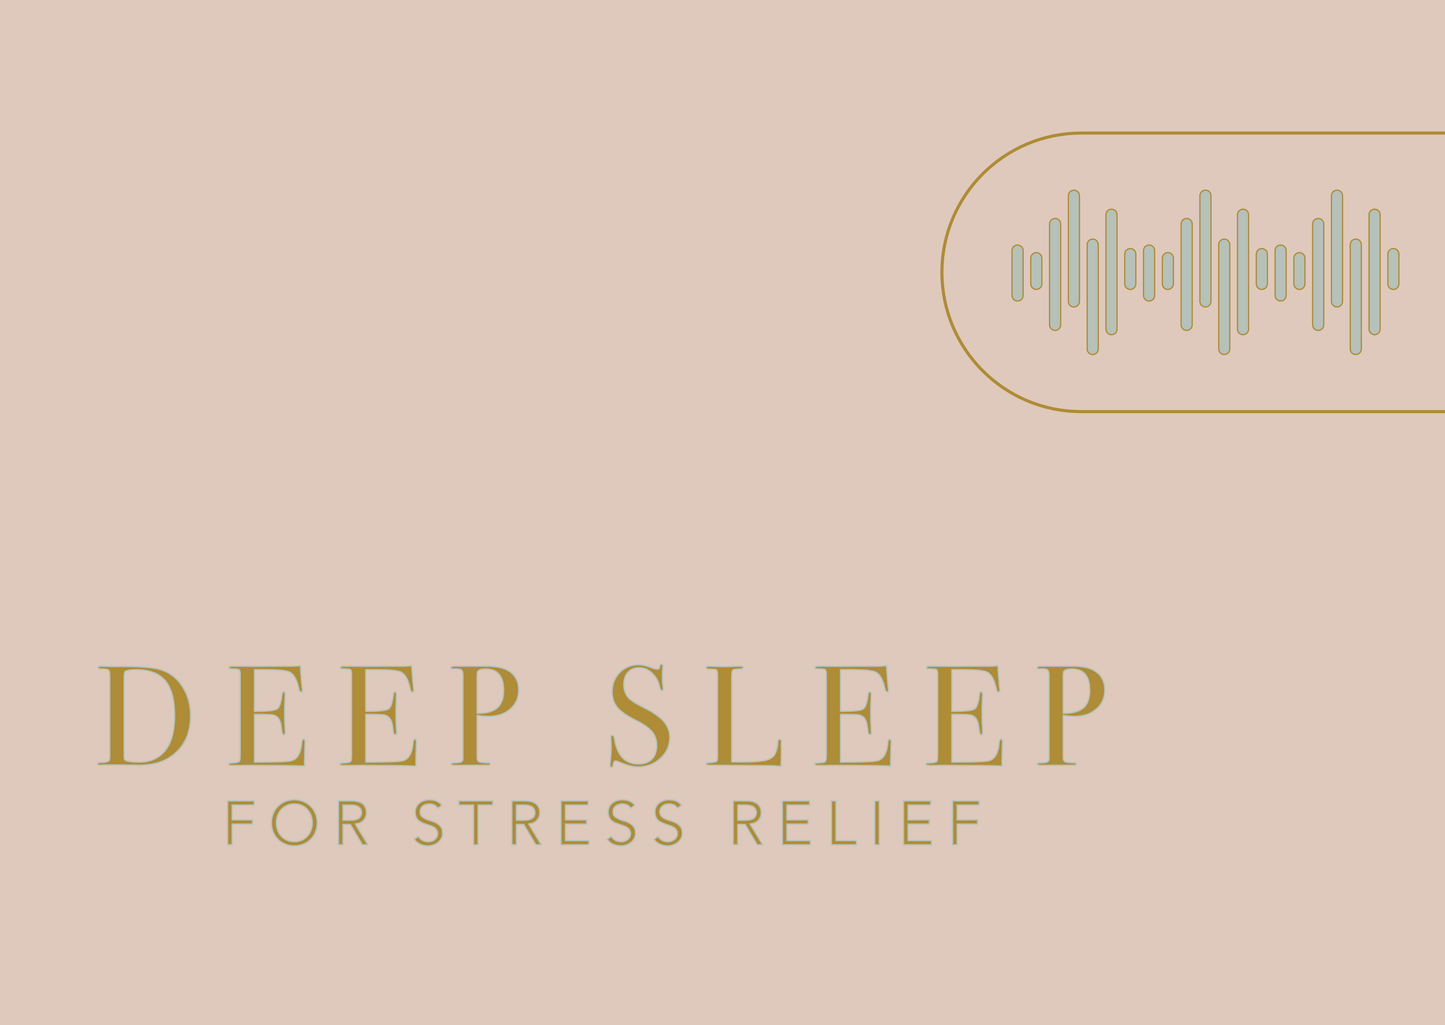 Deep sleep for stress relief - Hypnotherapy Recording